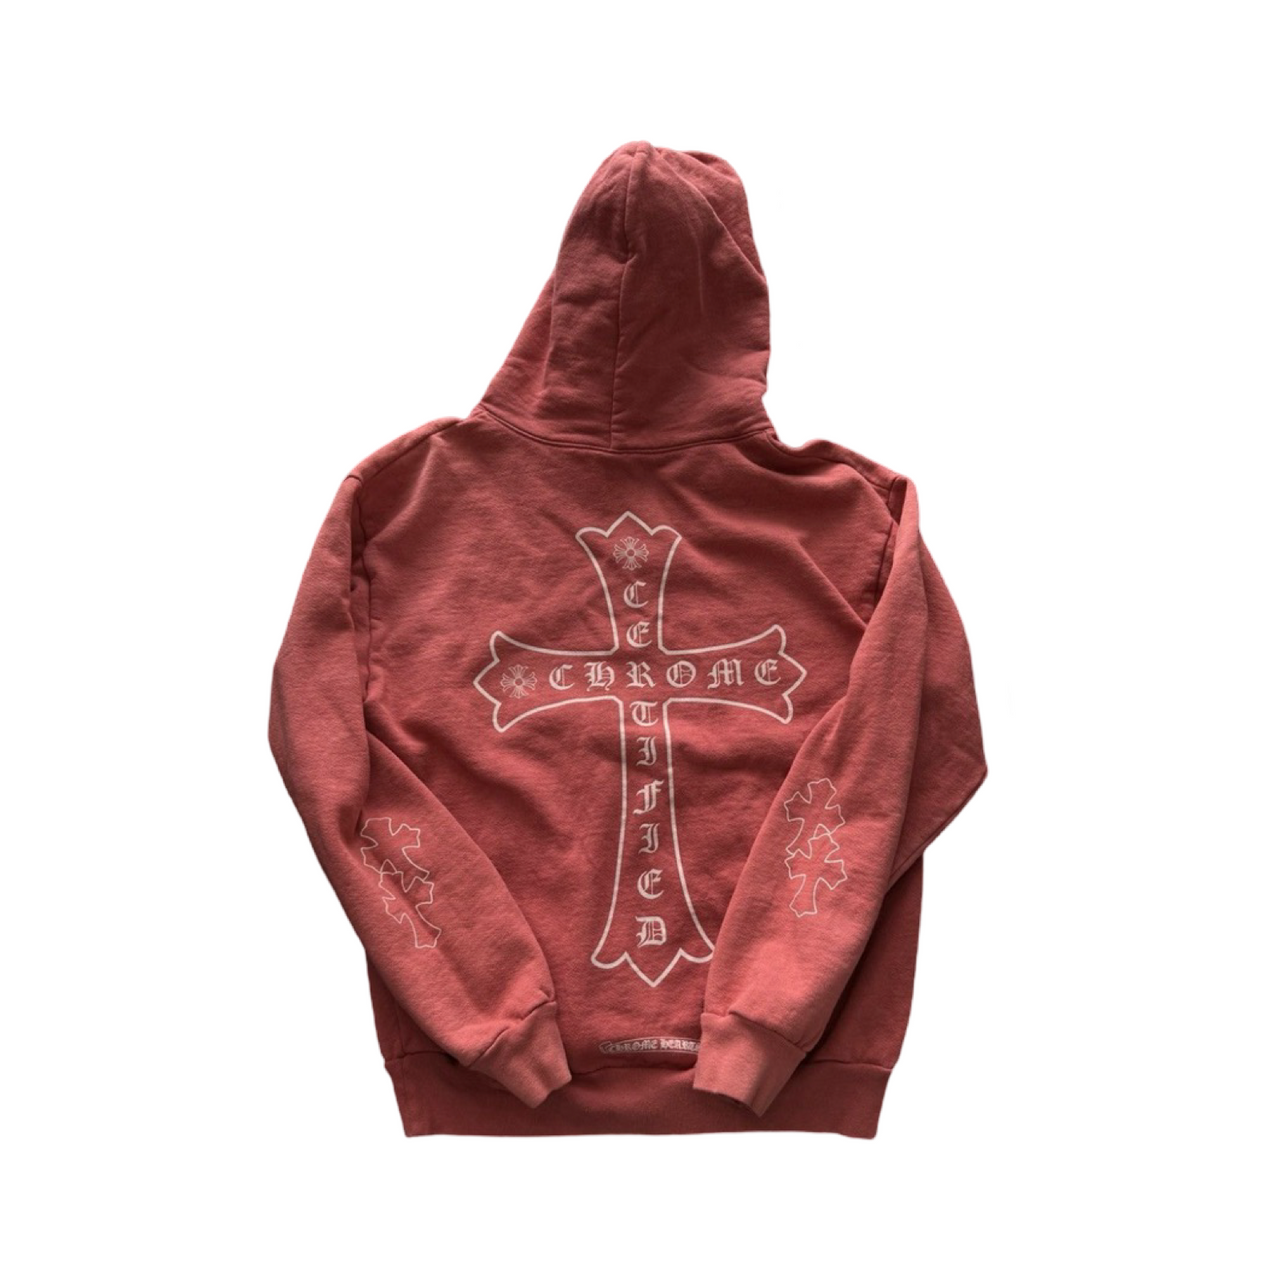 Chrome Hearts X CLB Miami Exclusive Hoodie